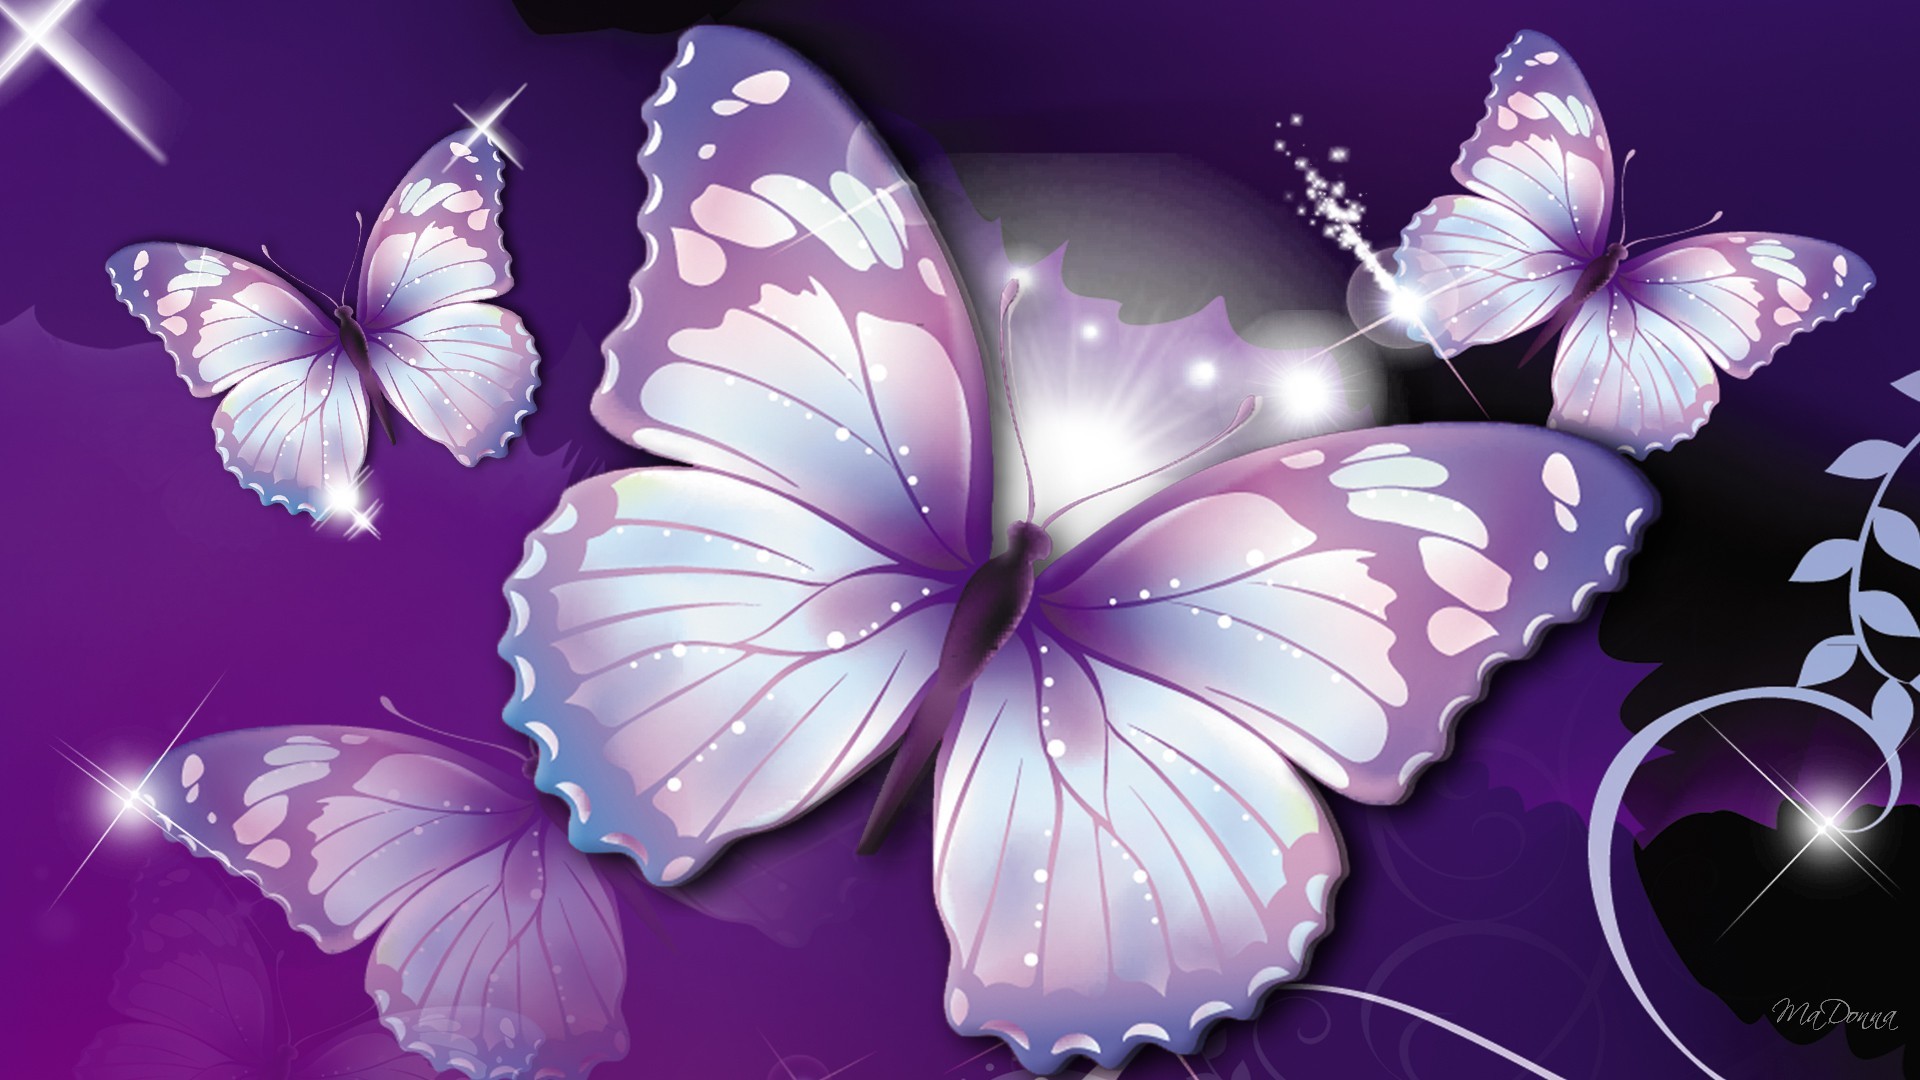 1920x1080 Abstract Butterfly Wallpapers Wallpaper 1920Ã1080 Image Of Butterfly  Wallpapers (31 Wallpapers) |